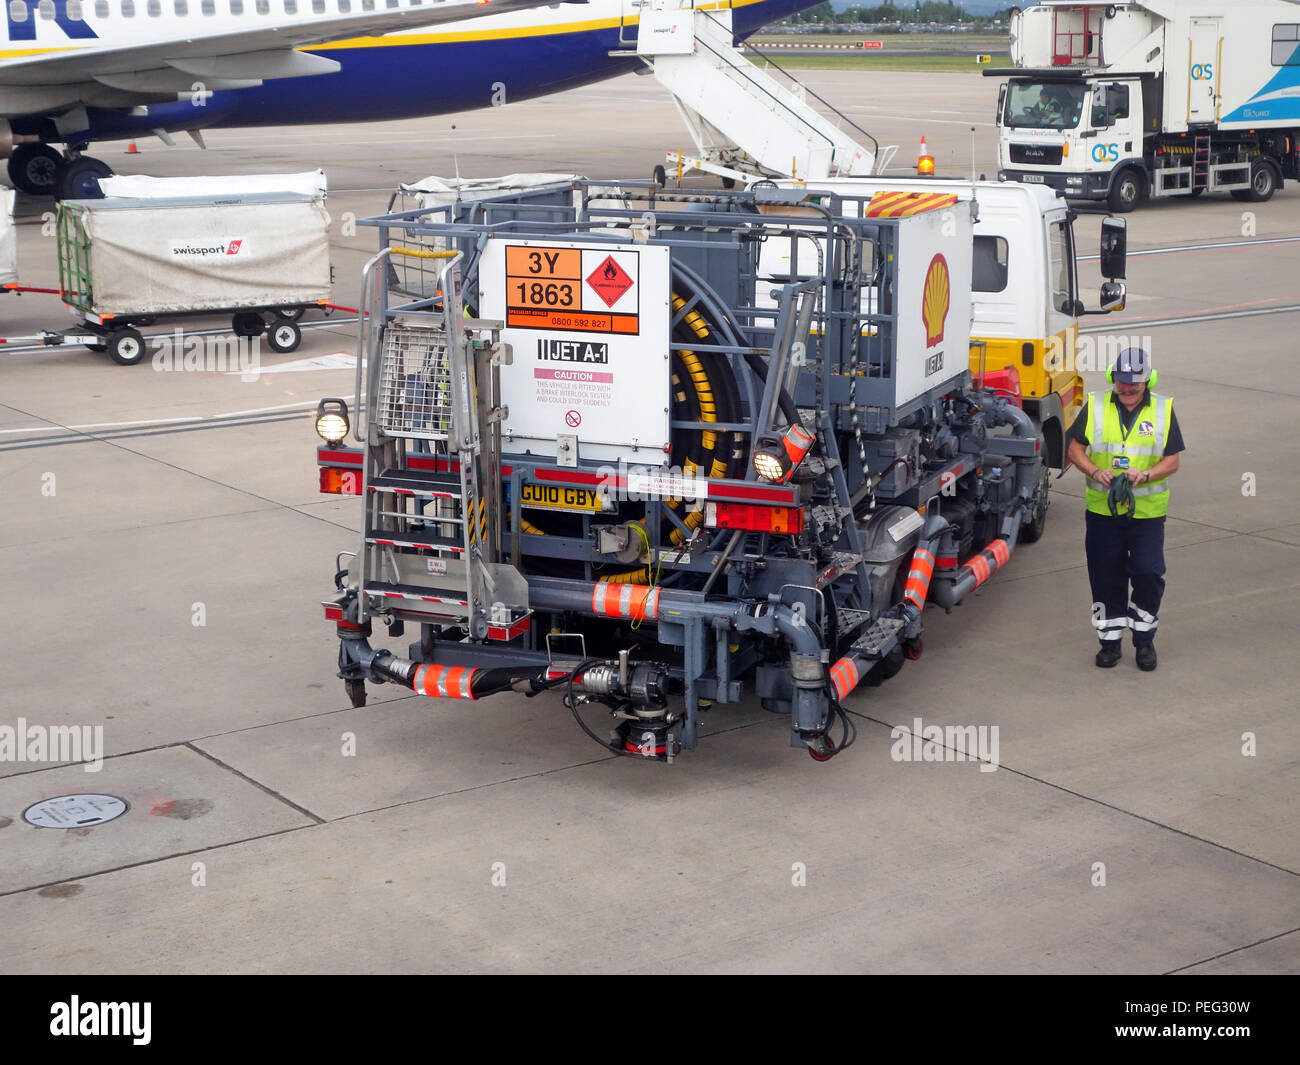 Airport worker starting the aviation refuelling of a plane at Manchester International Airport. image shows a fuel truck with plane also in shot Stock Photo